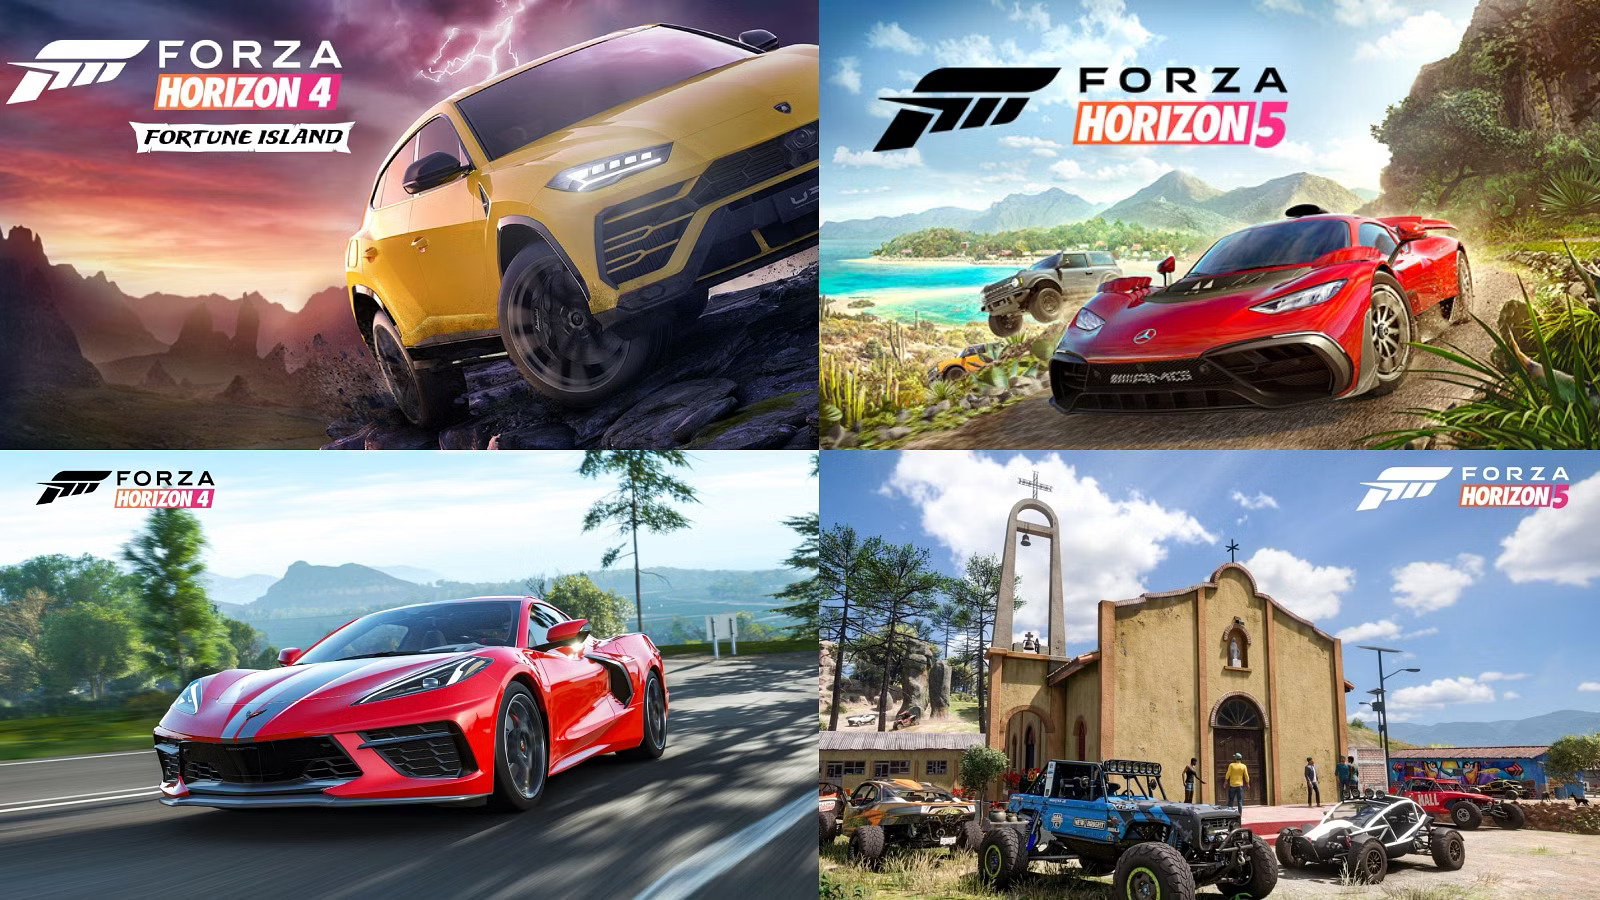 what is the difference between Forza Horizon 4 and Forza Horizon 5